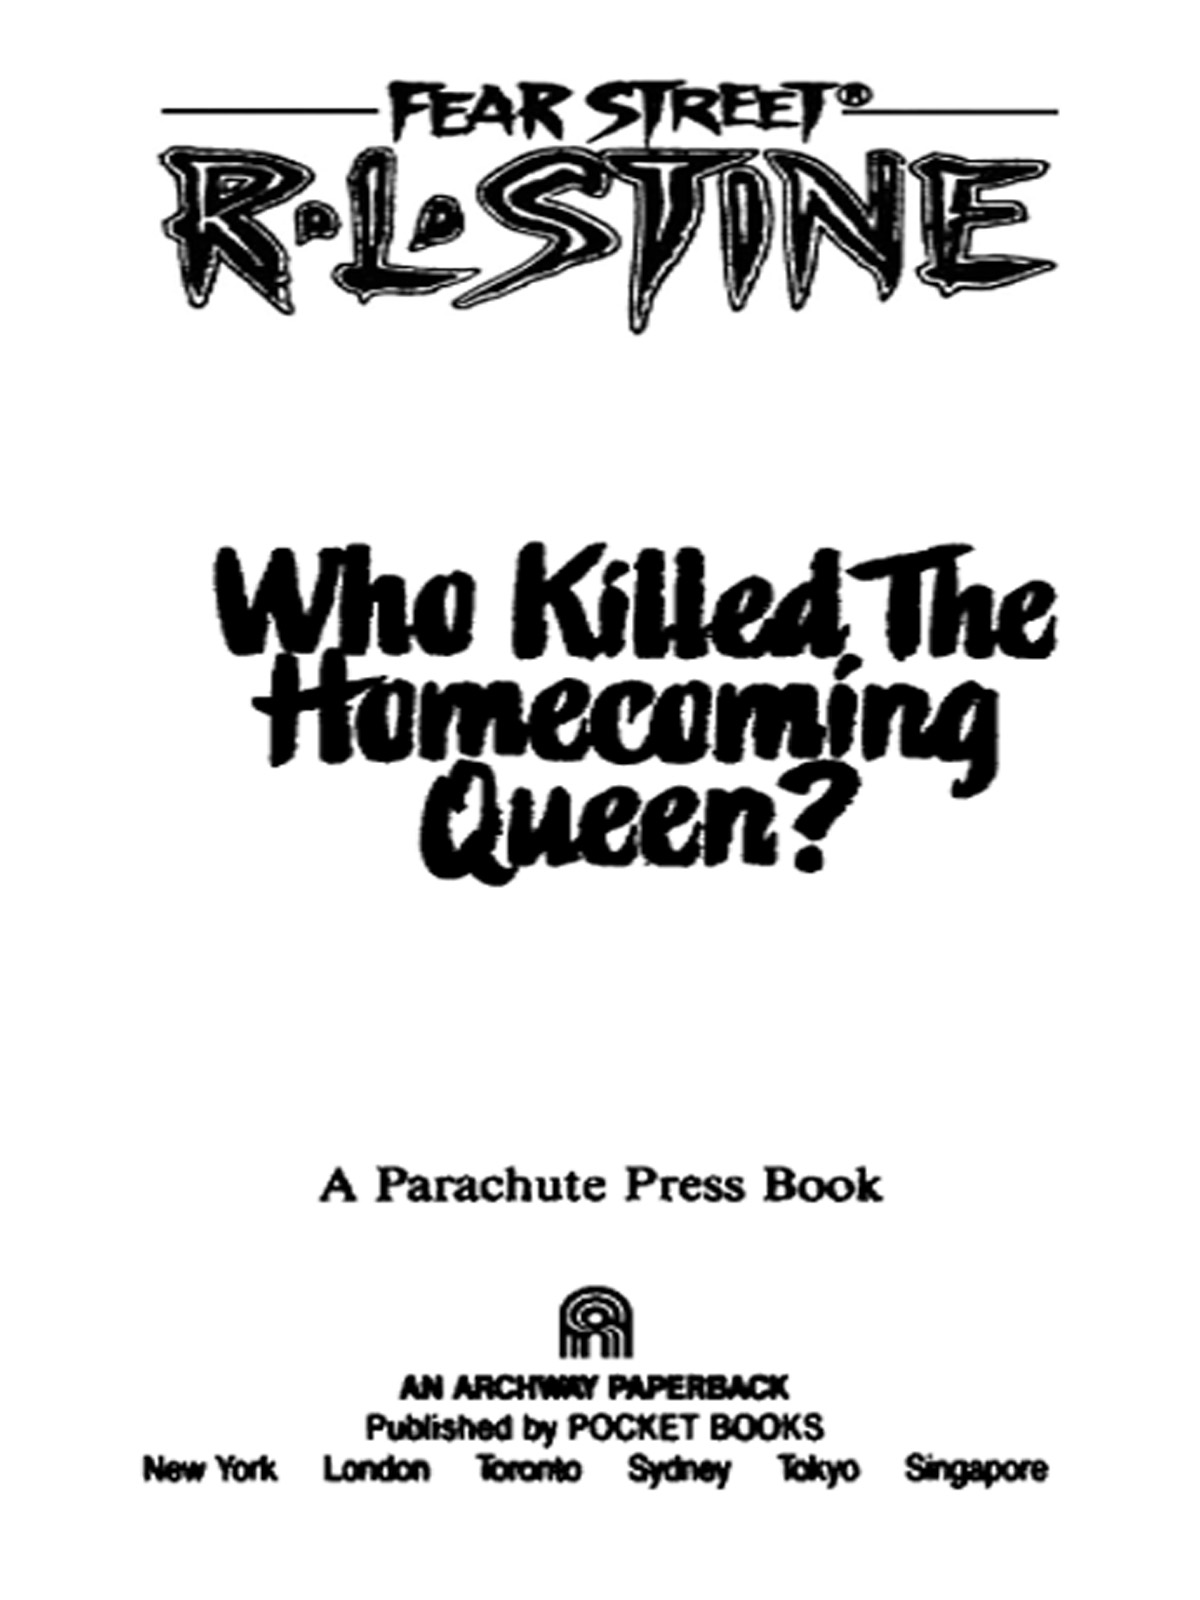 Who Killed the Homecoming Queen? (1997) by R.L. Stine